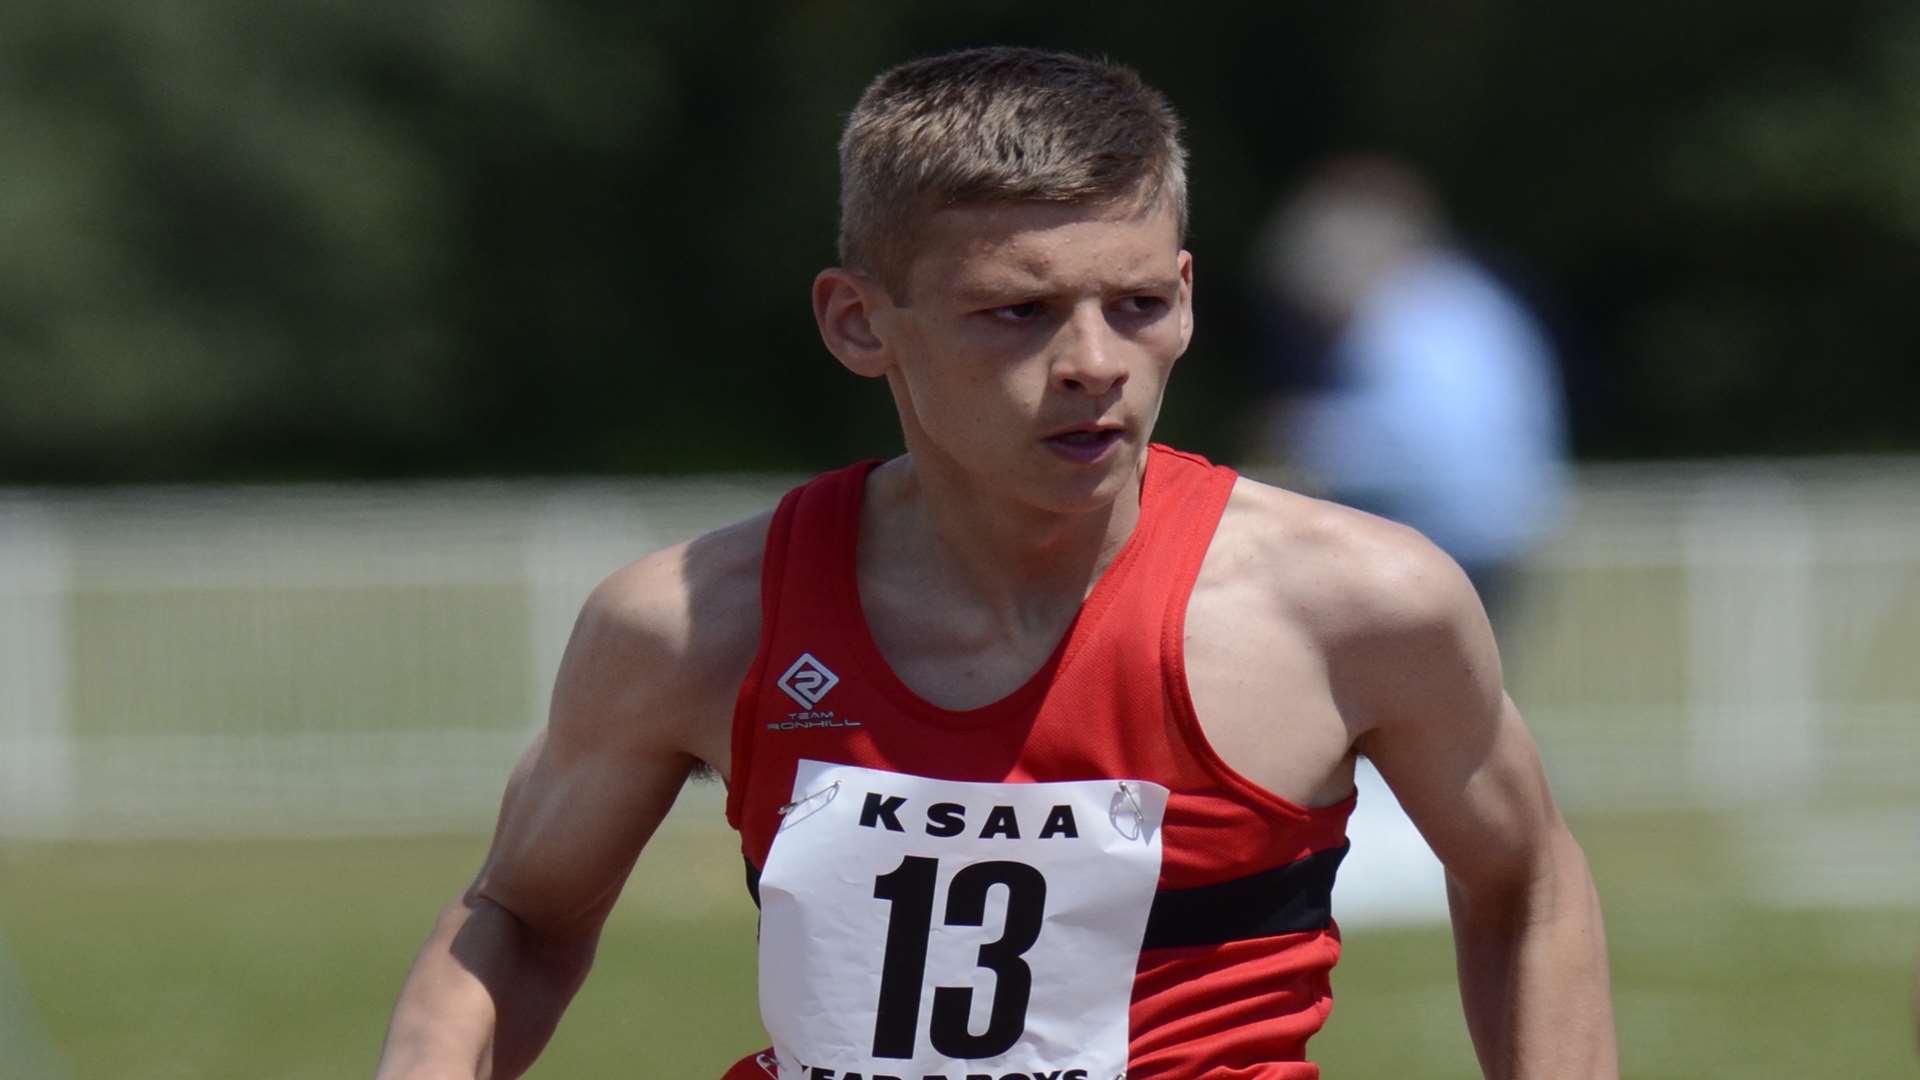 Medway and Maidstone's Isaac Milham was among the club's winners after triumphing in the under-15 80m hurdles Picture: Gary Browne